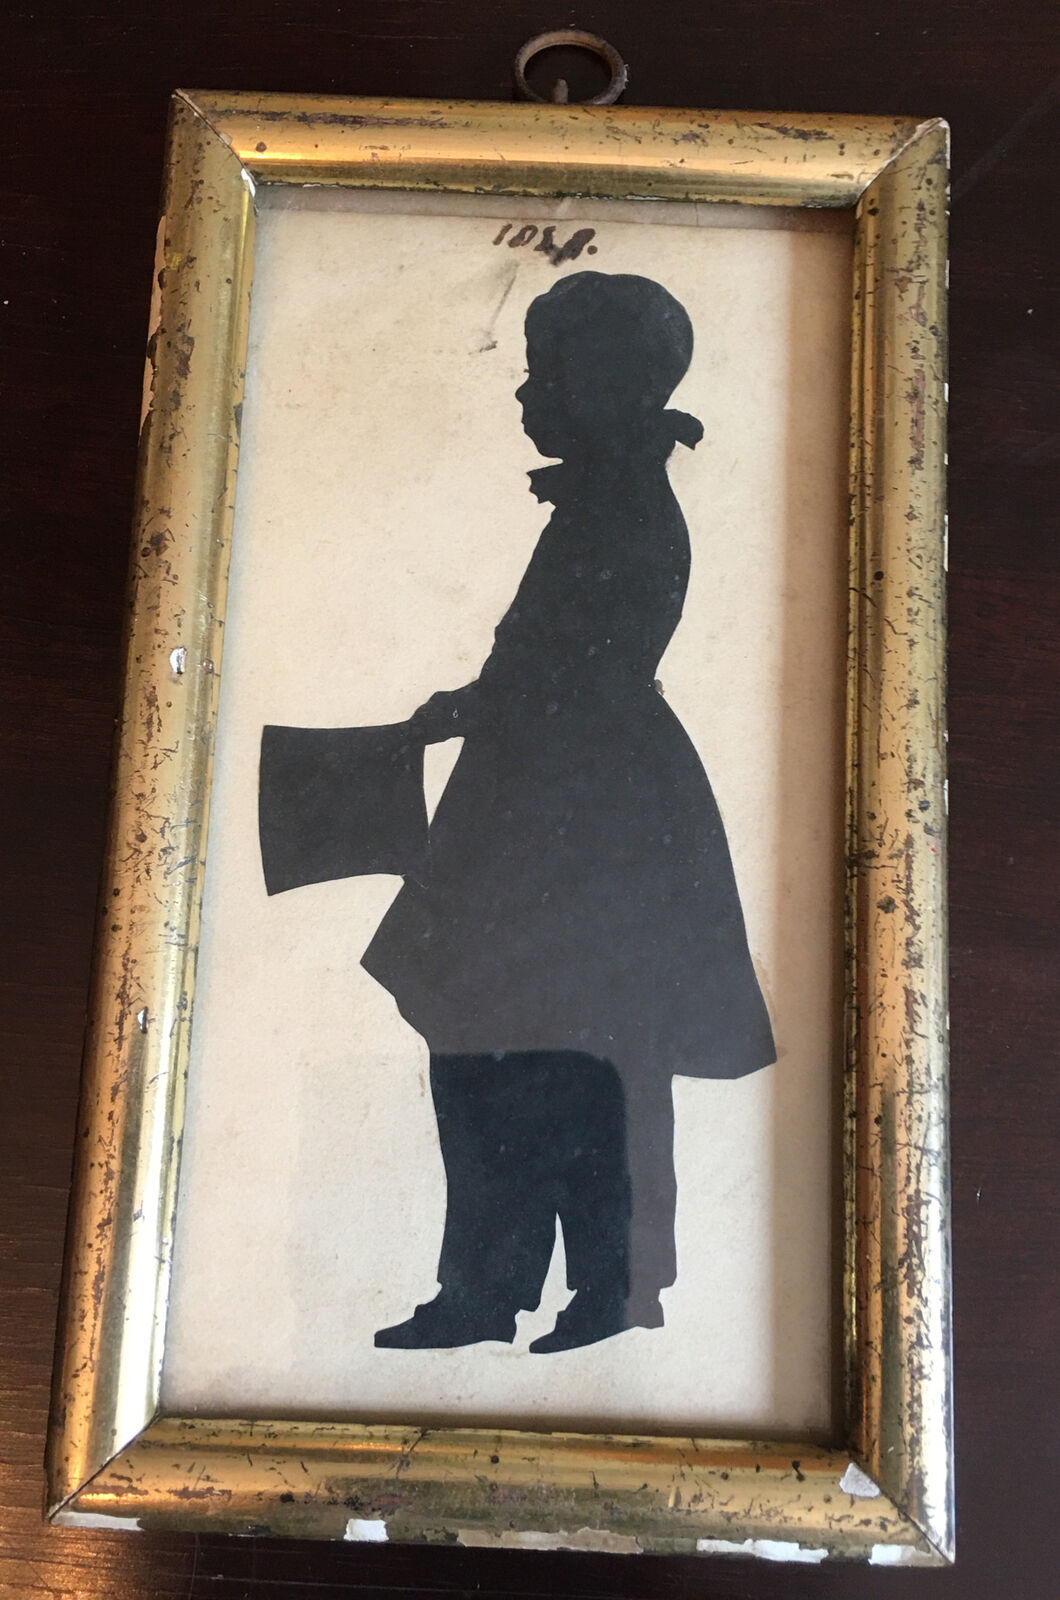 Silhouette Free shipping anywhere in the nation Young Boy in Formal Clothing Ranking TOP17 etc. Full Top Hat Figure